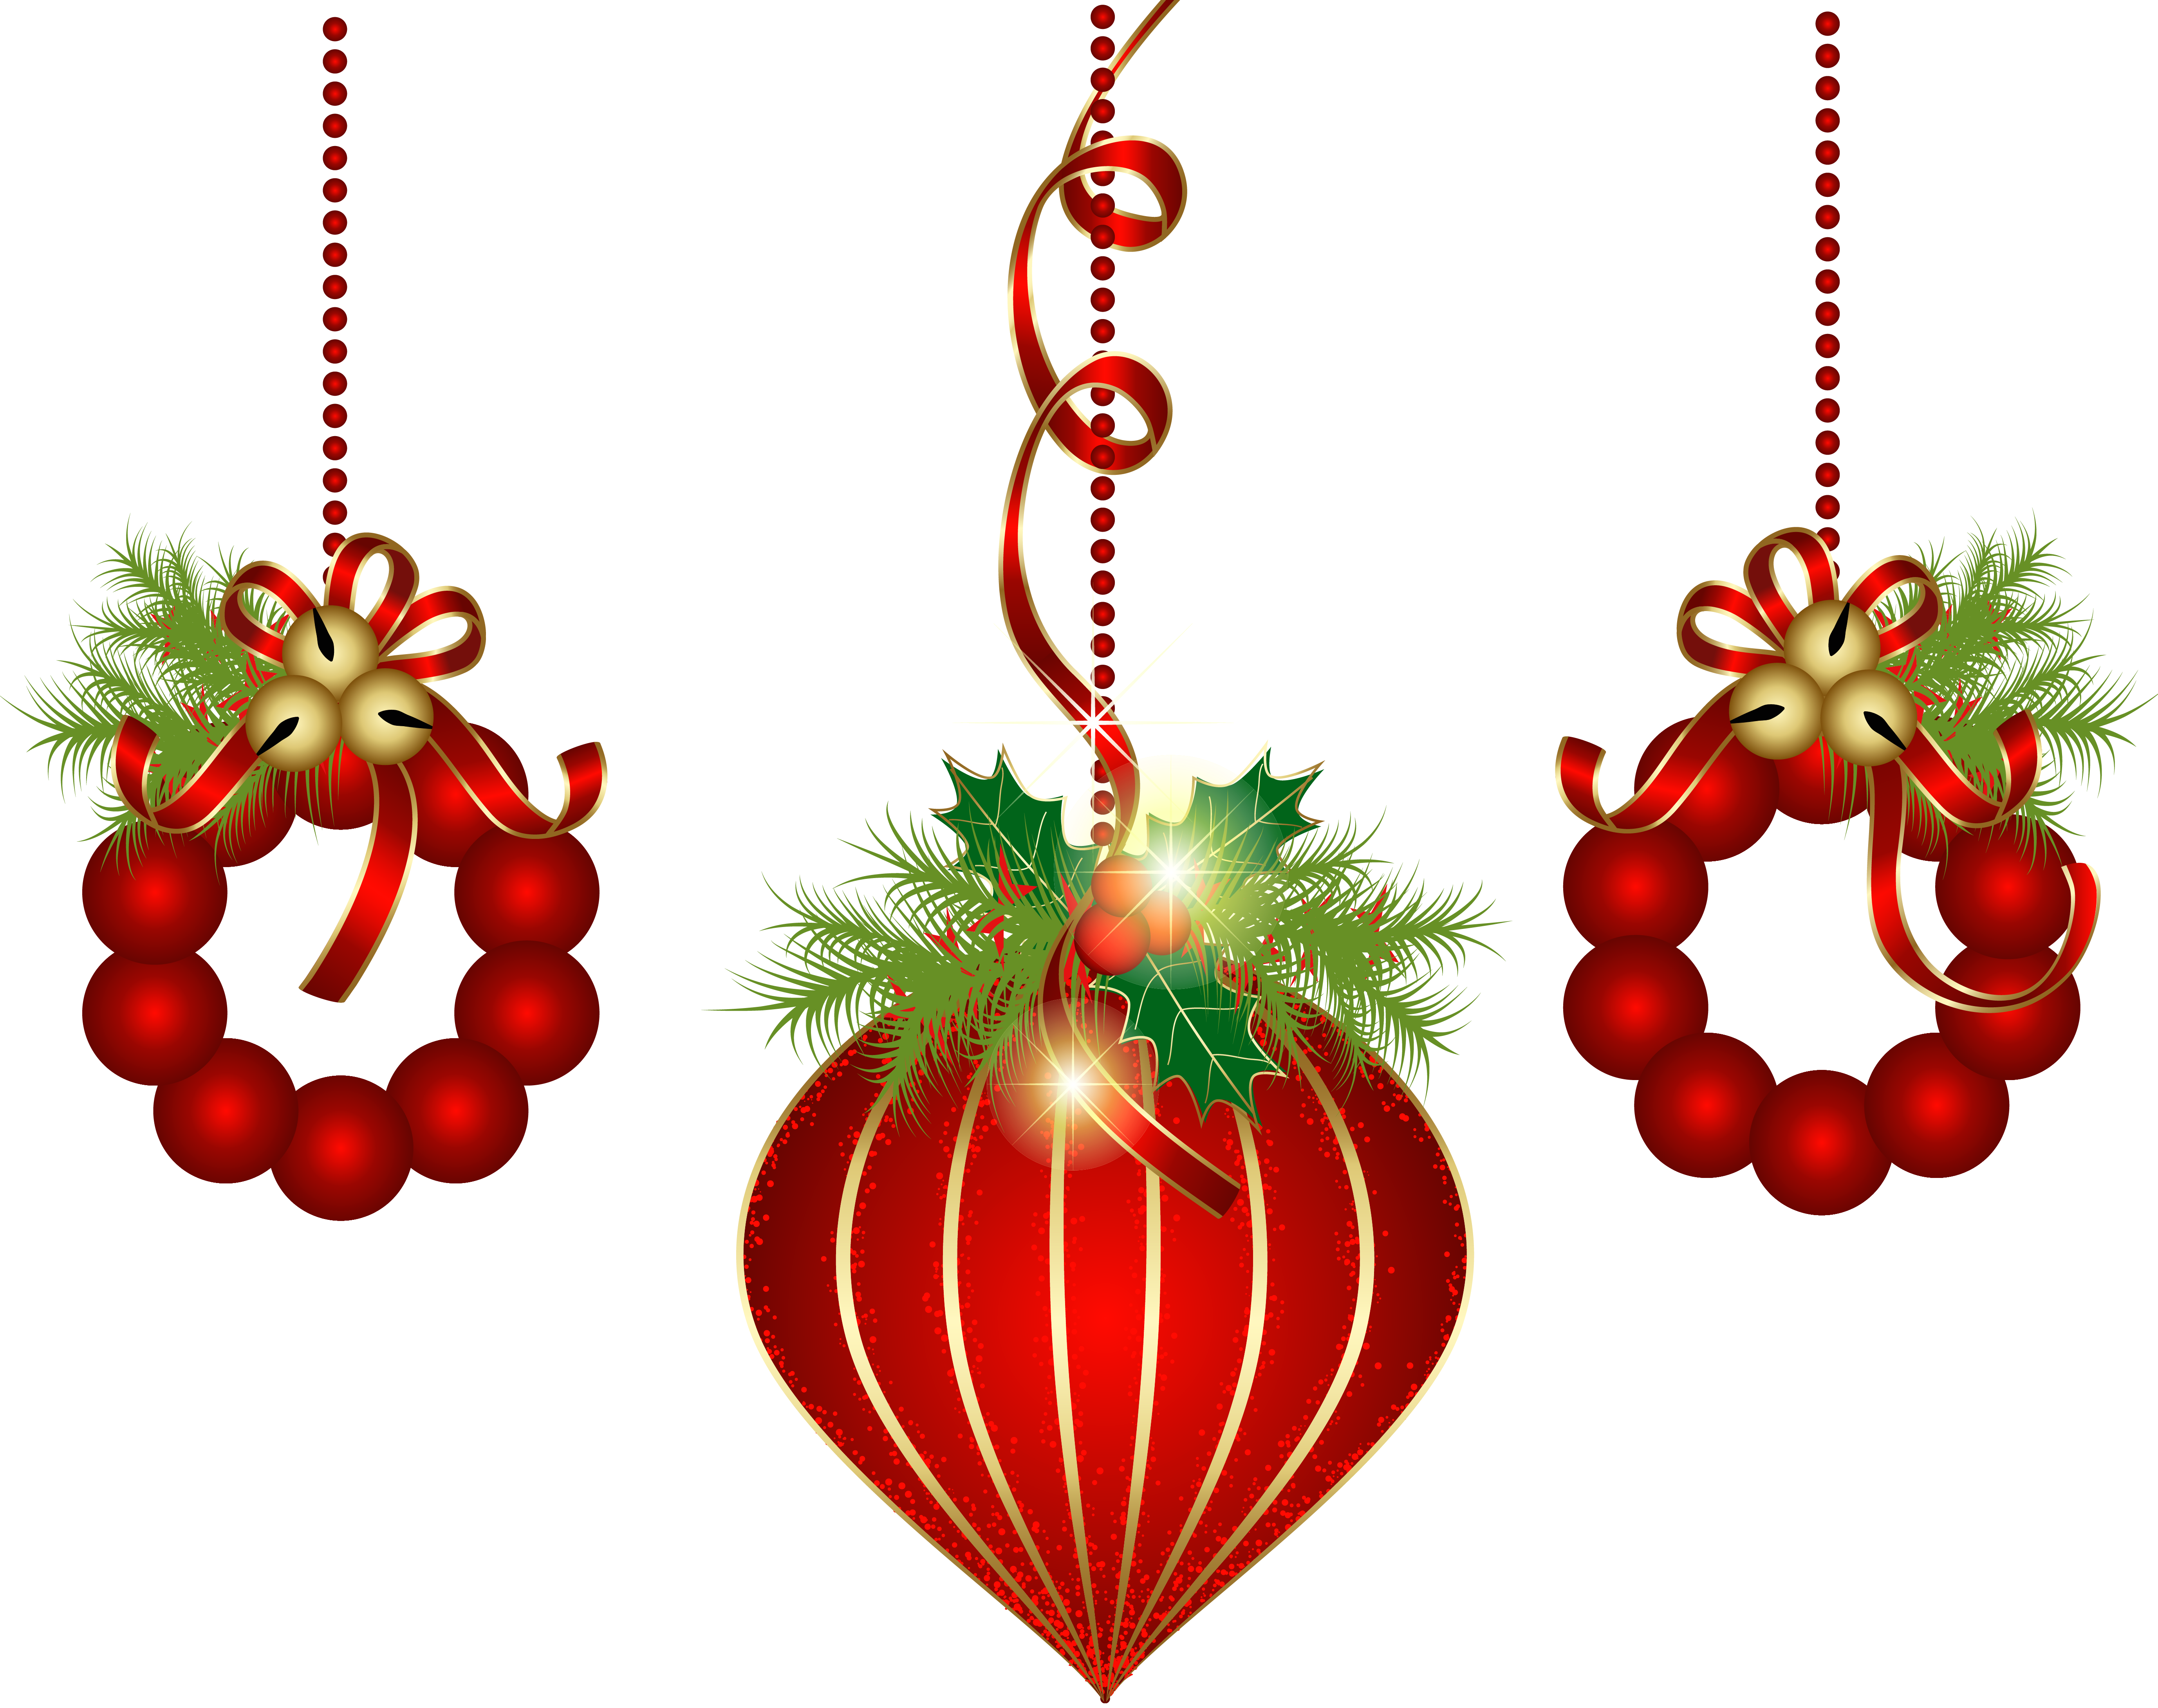 Transparent Red Christmas Ornaments Png Clipart - Xmas Images, Transparent background PNG HD thumbnail